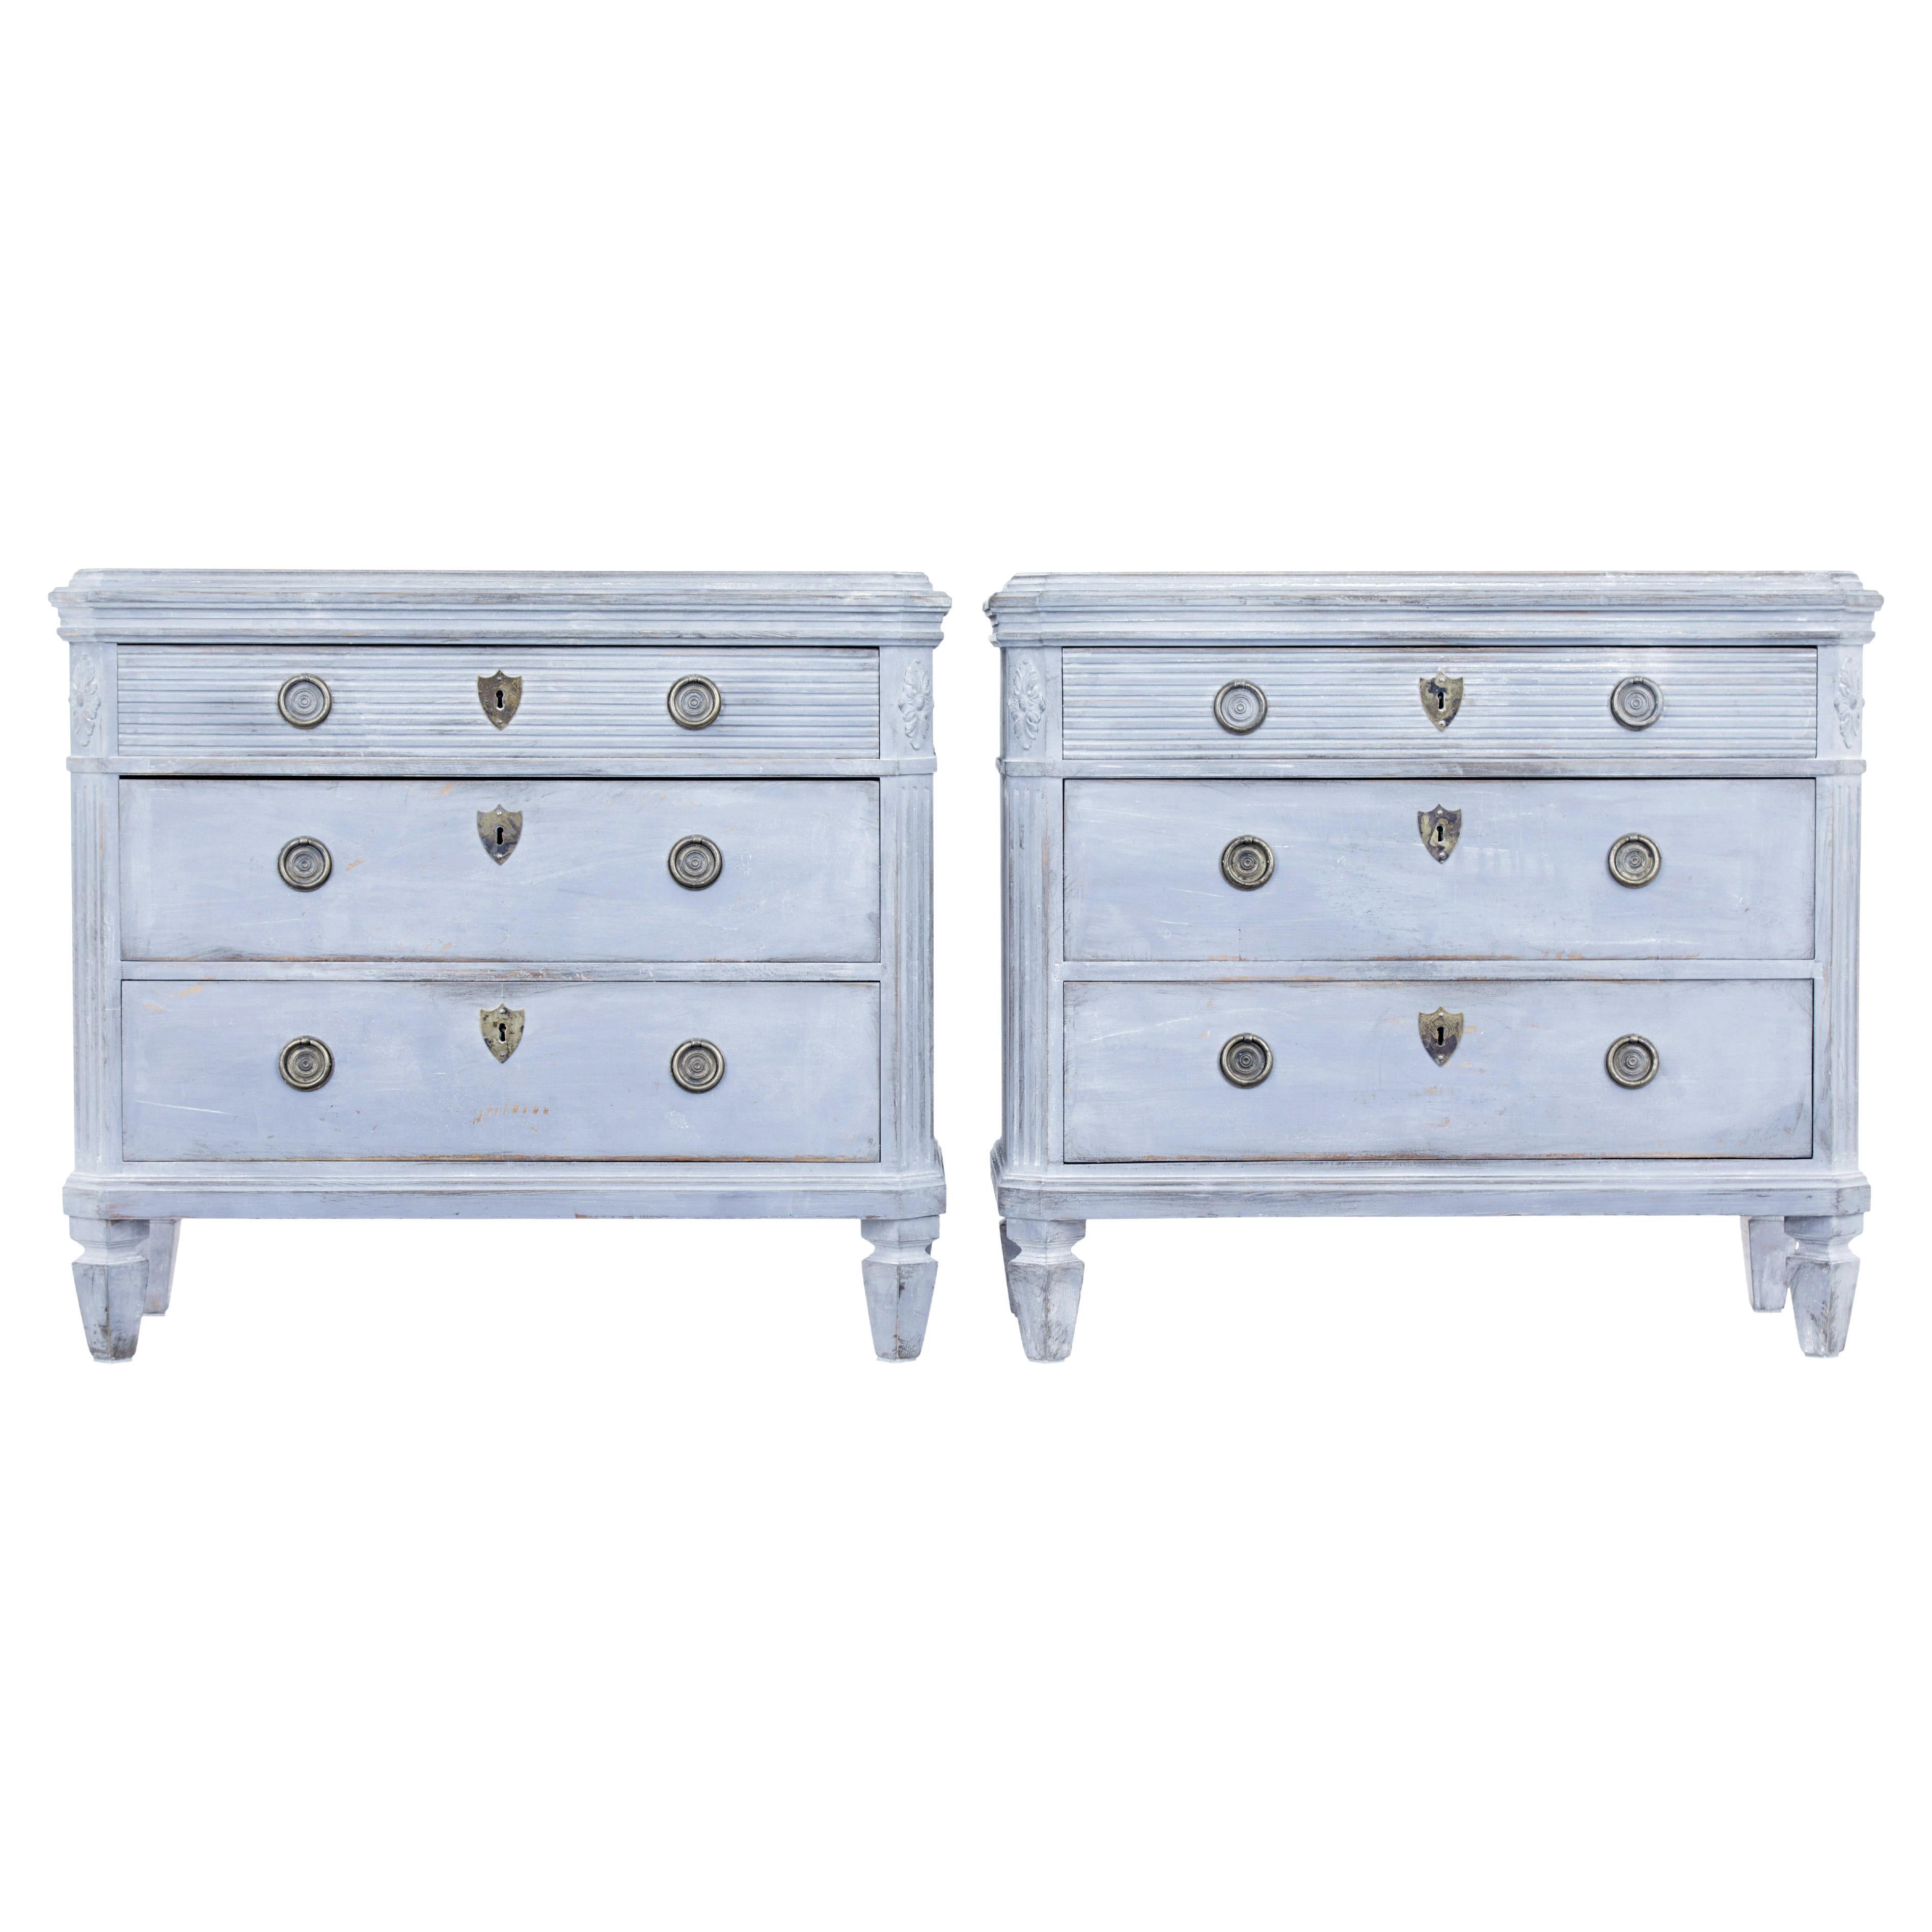 Pair of 19th century painted Swedish chest of drawers For Sale